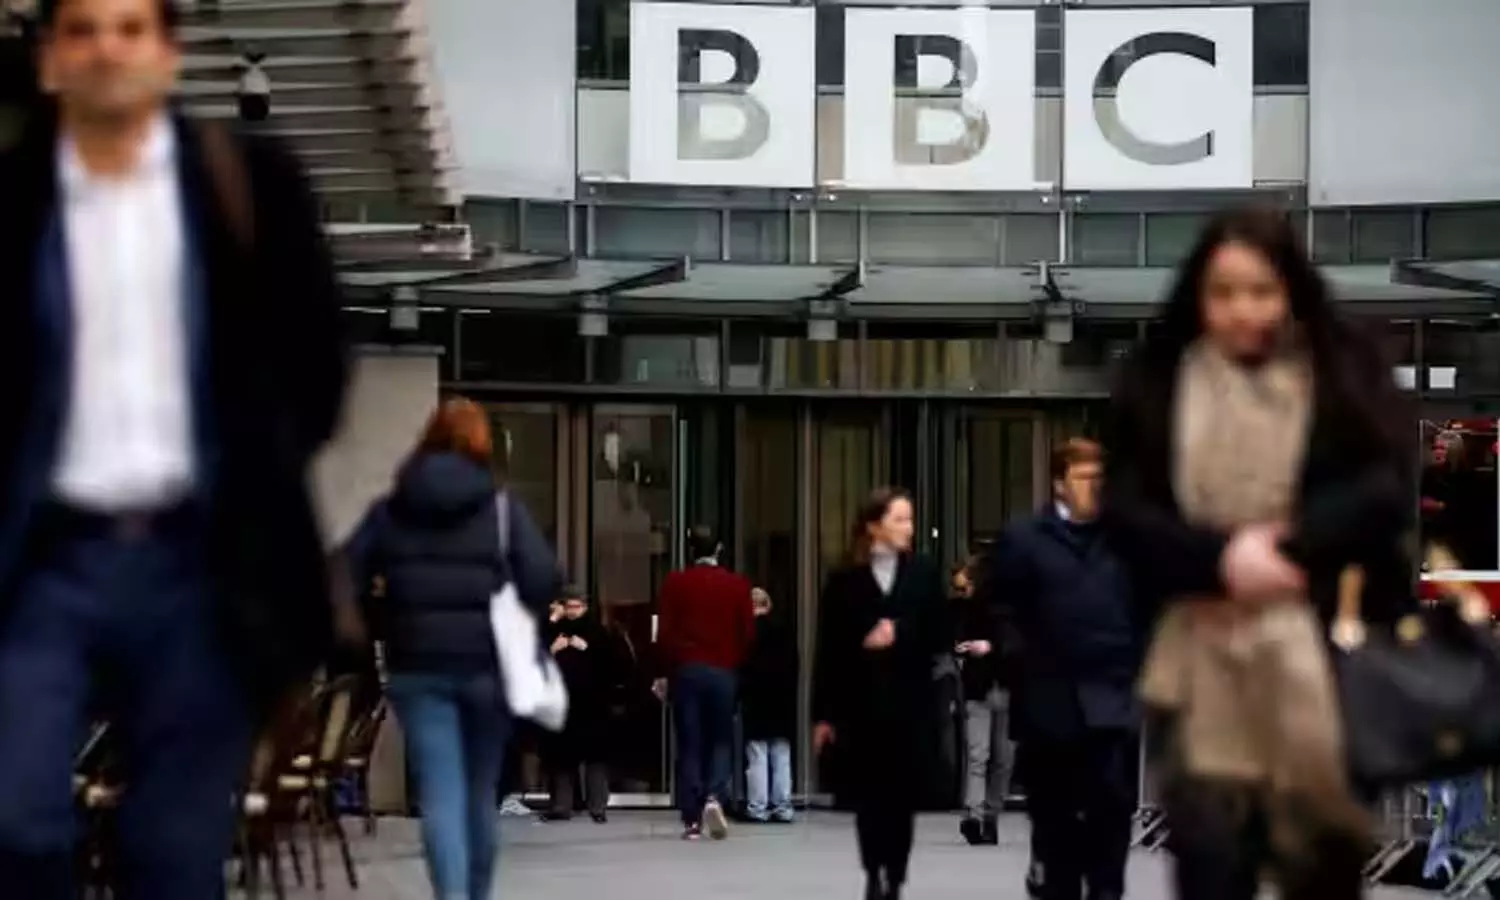 The issue of income tax survey on BBC raised in the British Parliament